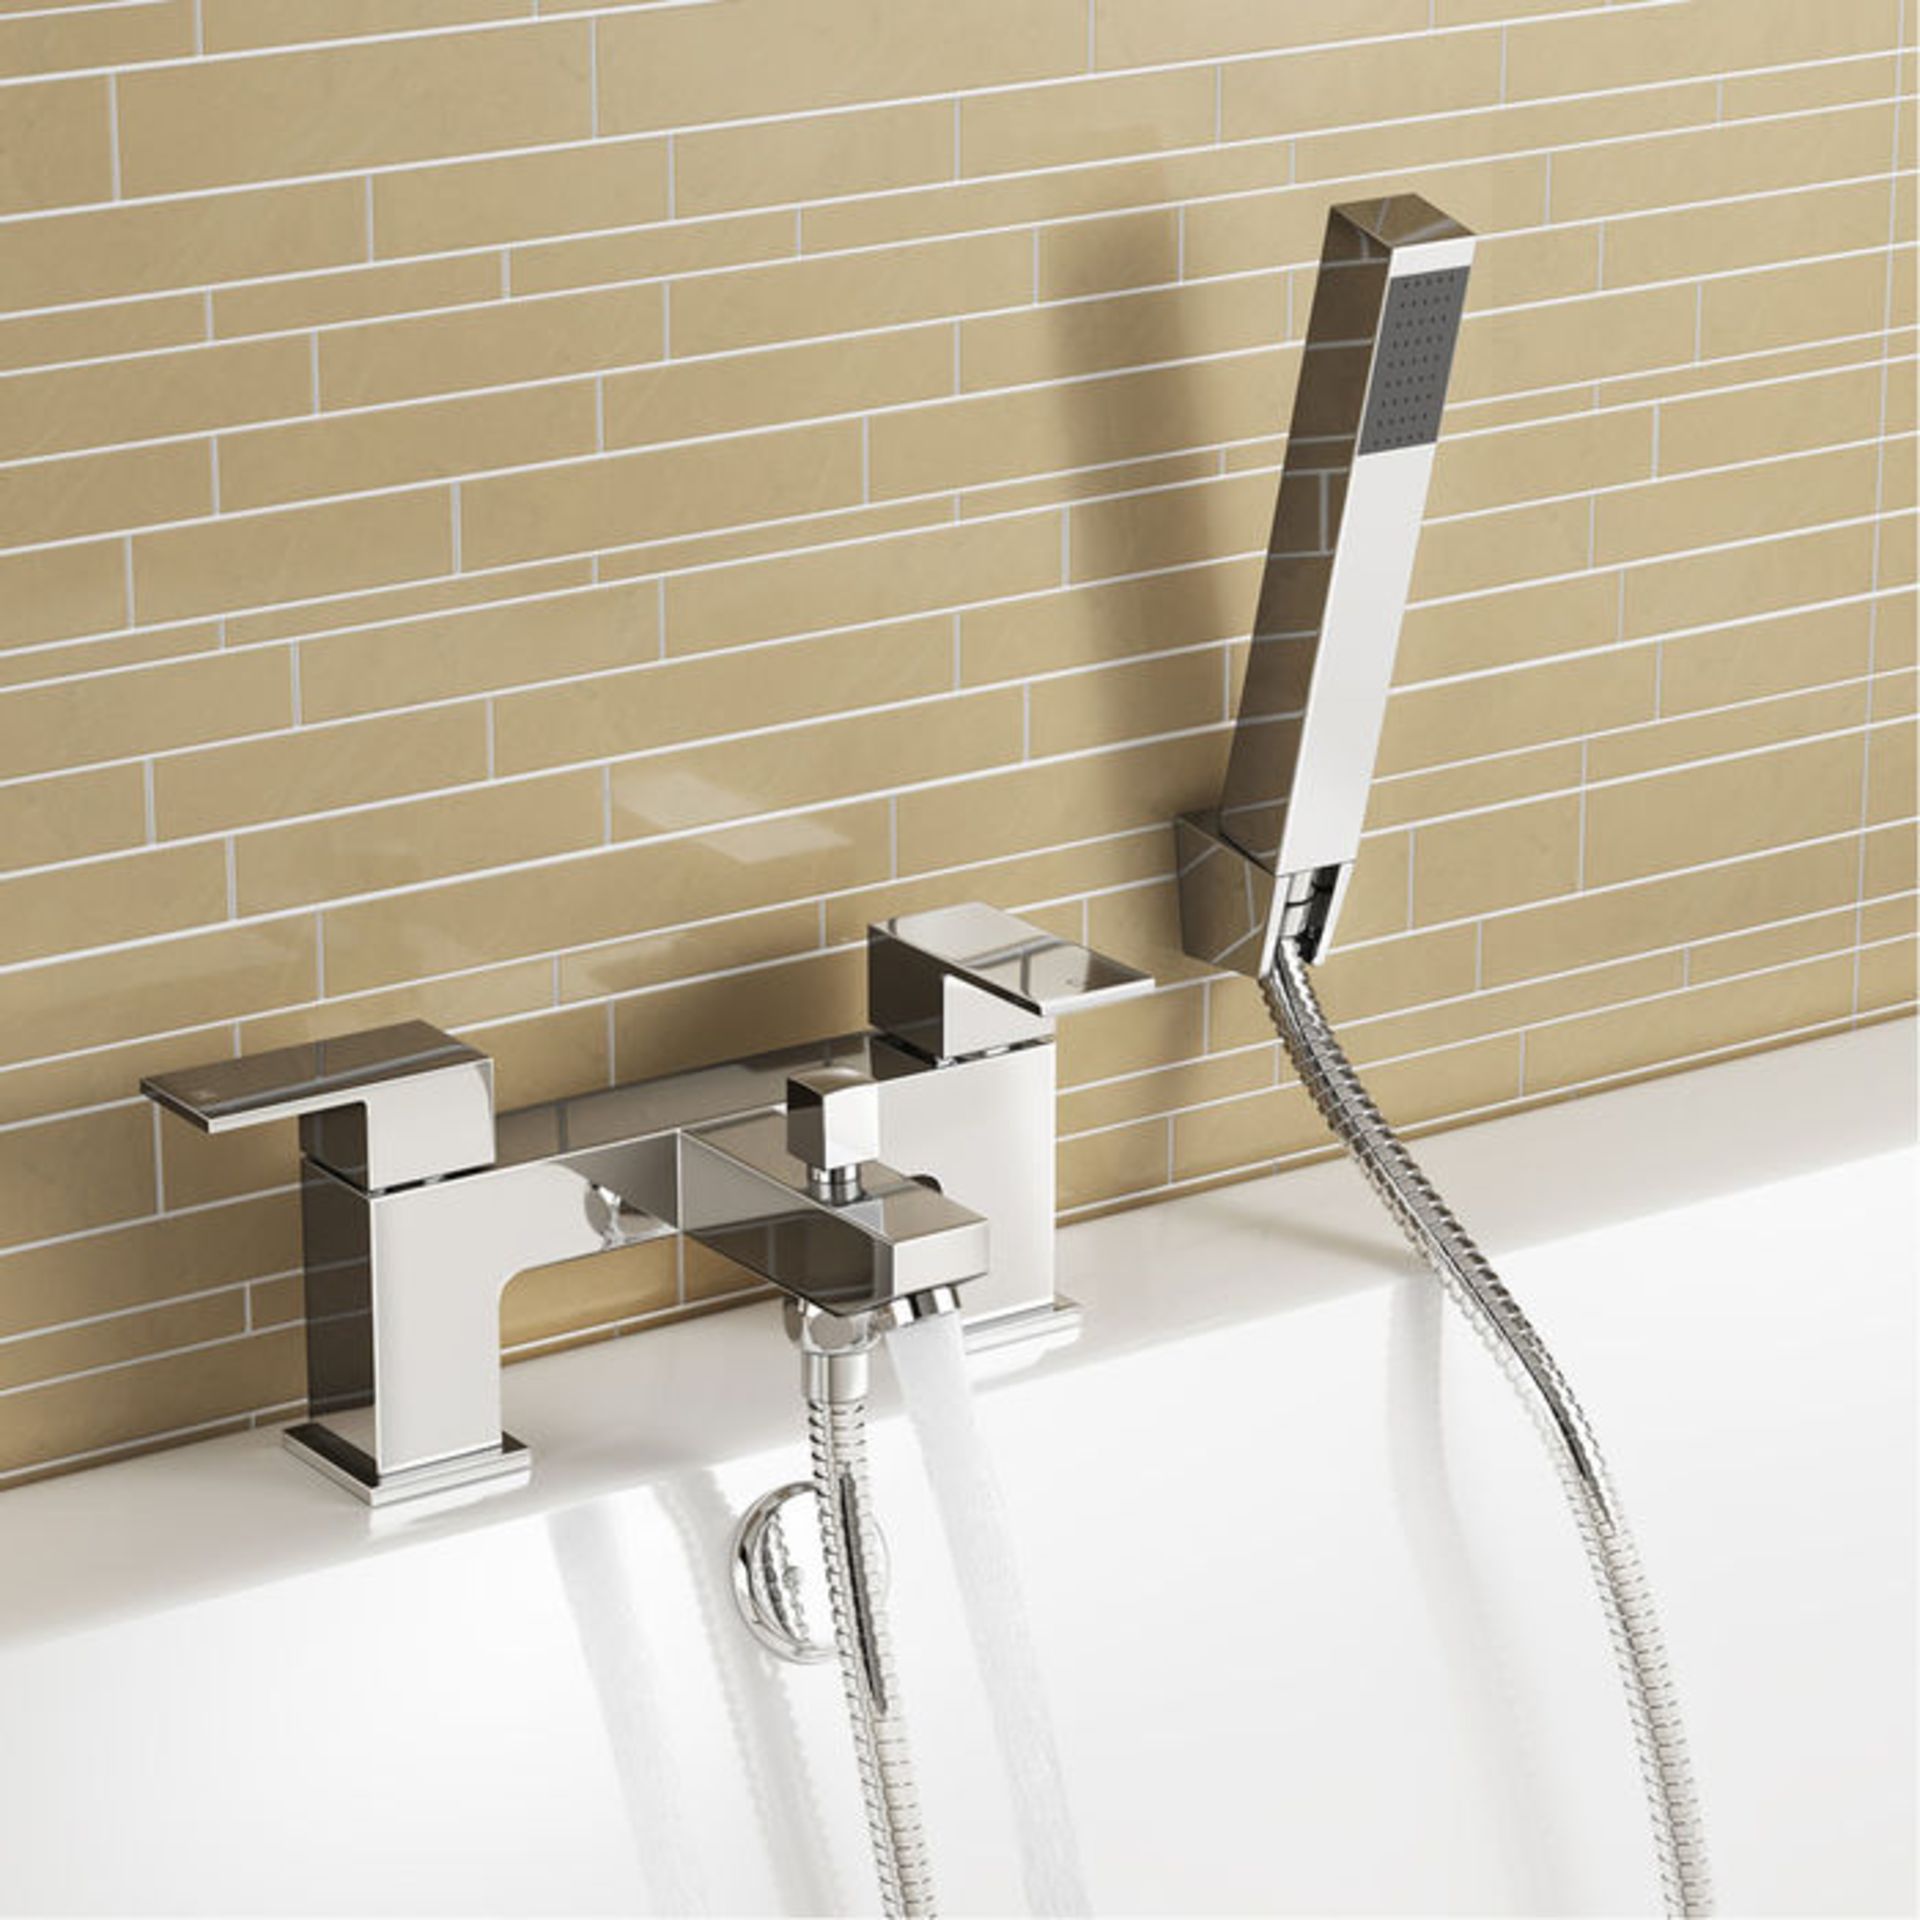 (G33) Harper Bath Mixer Taps with Hand Held Shower Head RRP £119.99 Anti-corrosive chrome plated - Image 2 of 3